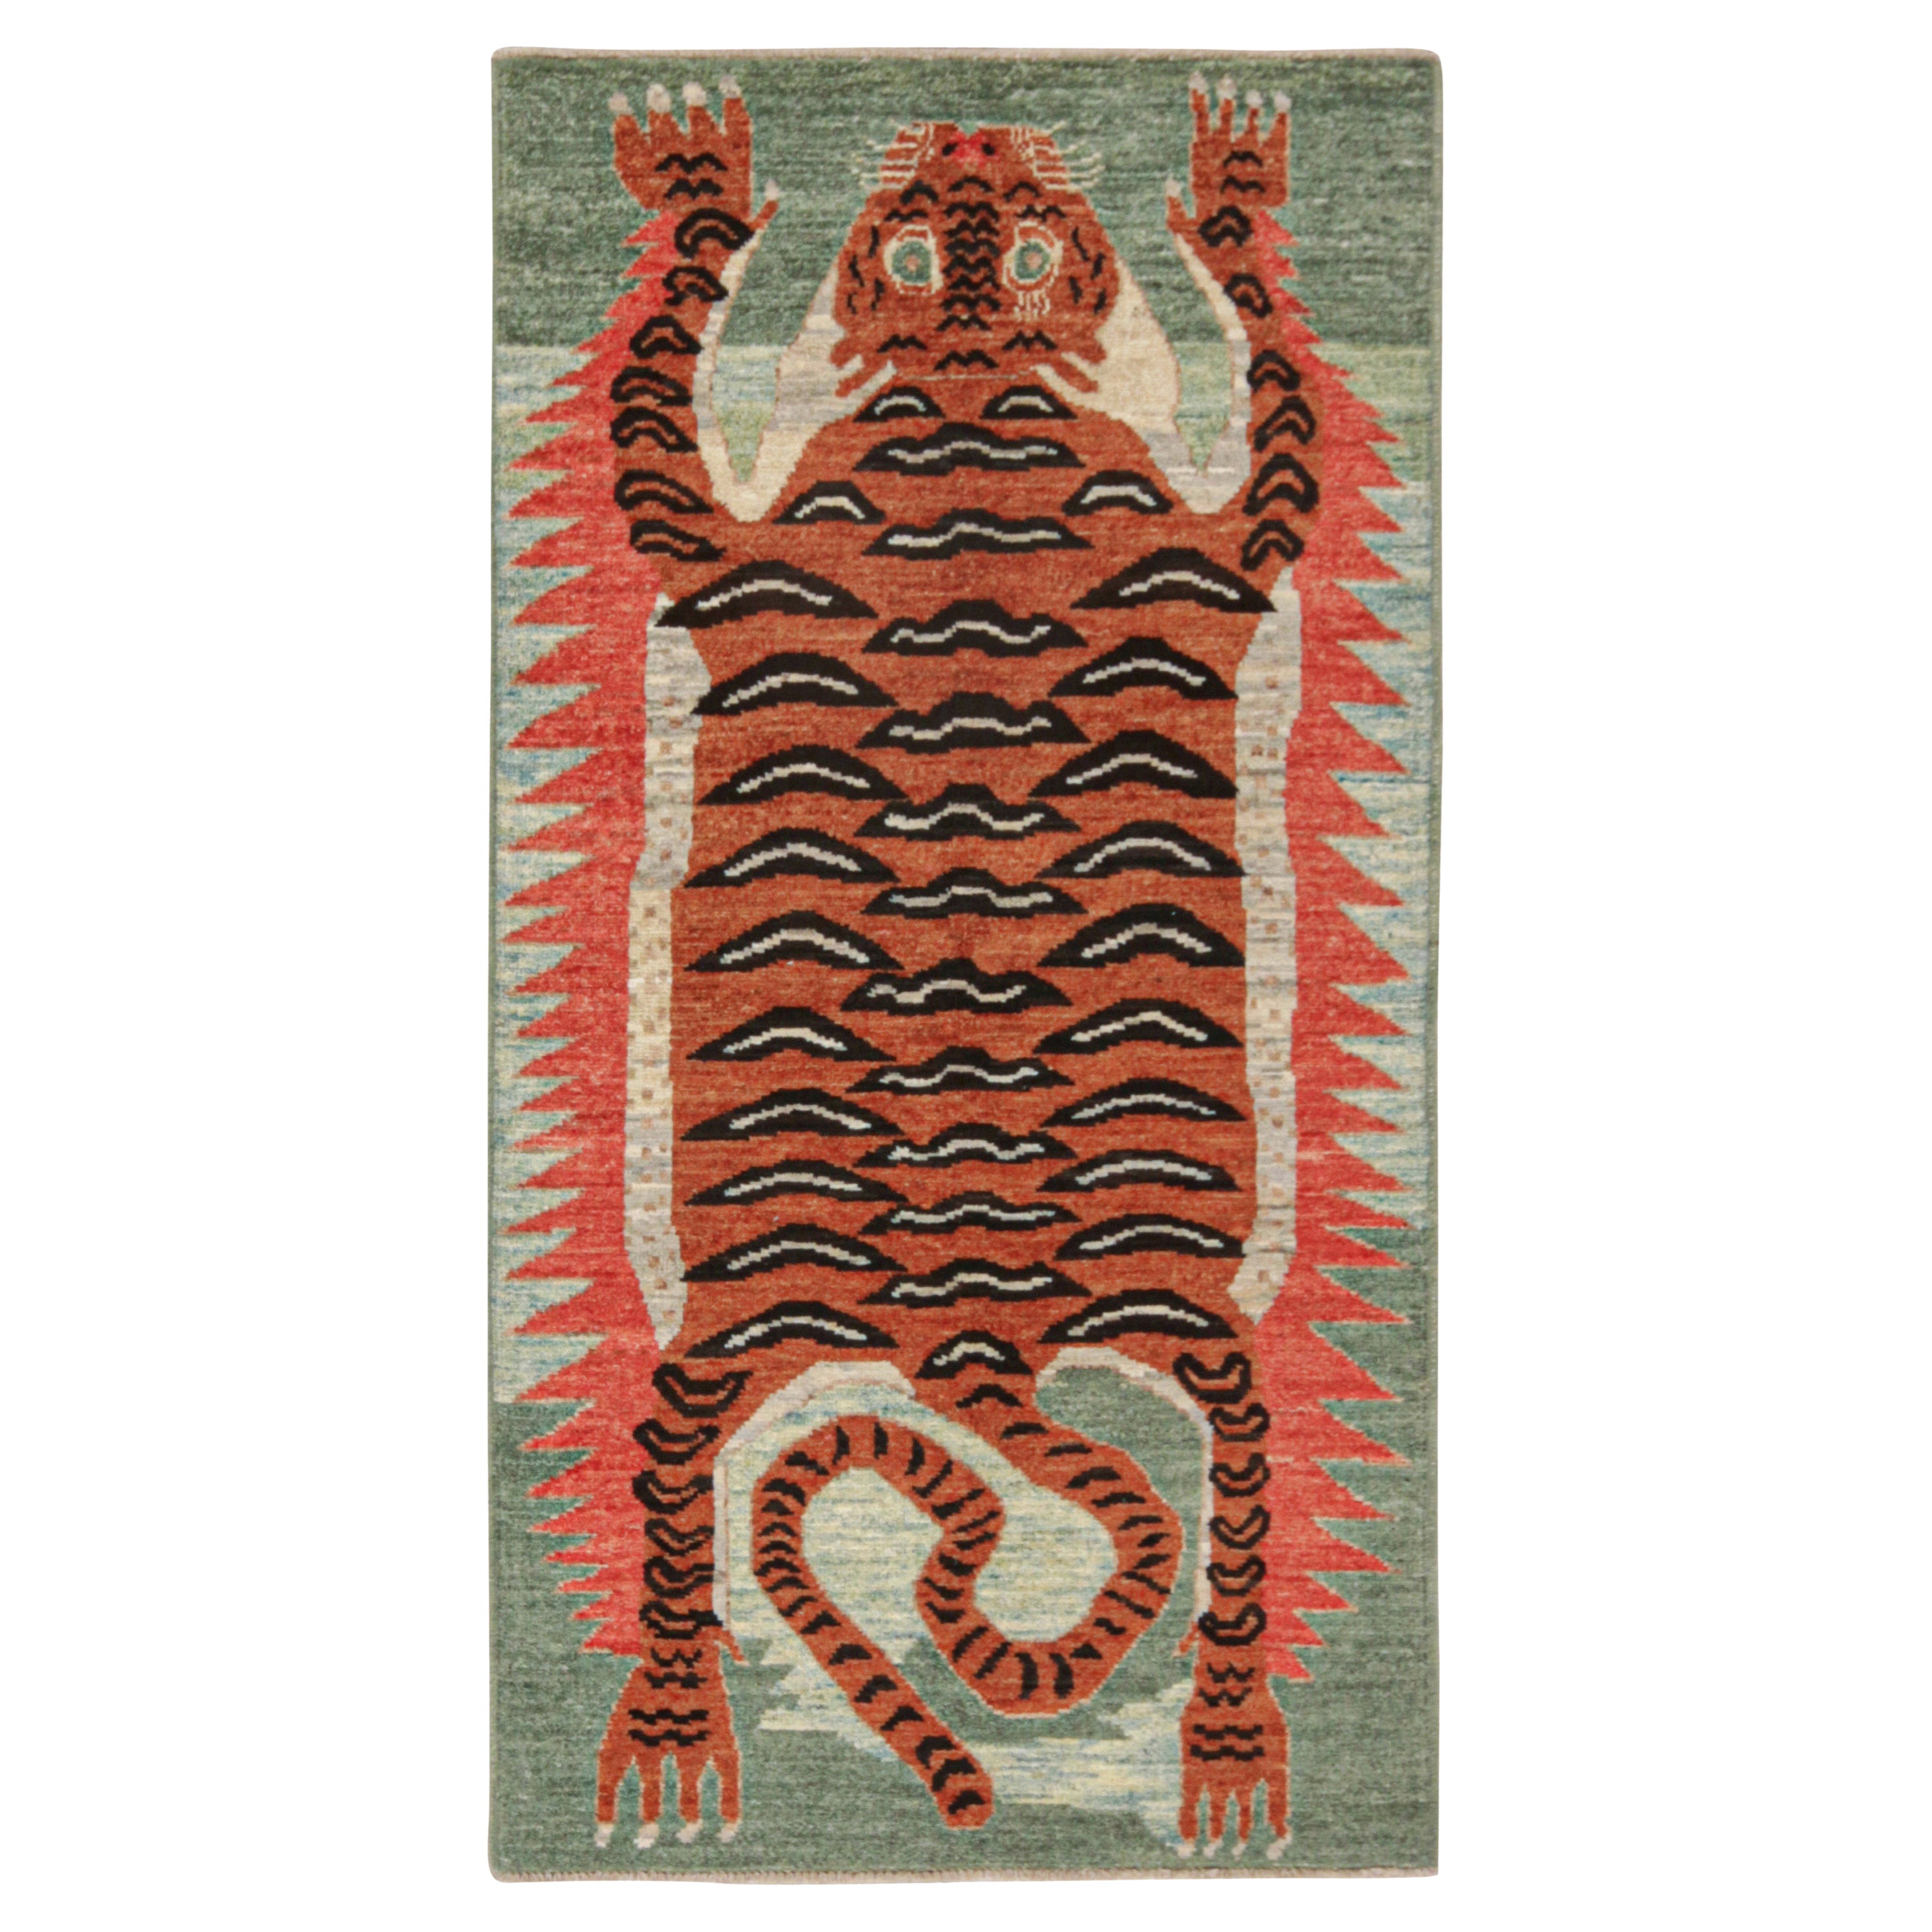 Rug & Kilim’s Classic Style Tiger-Skin Runner with Orange and Brown Pictorial